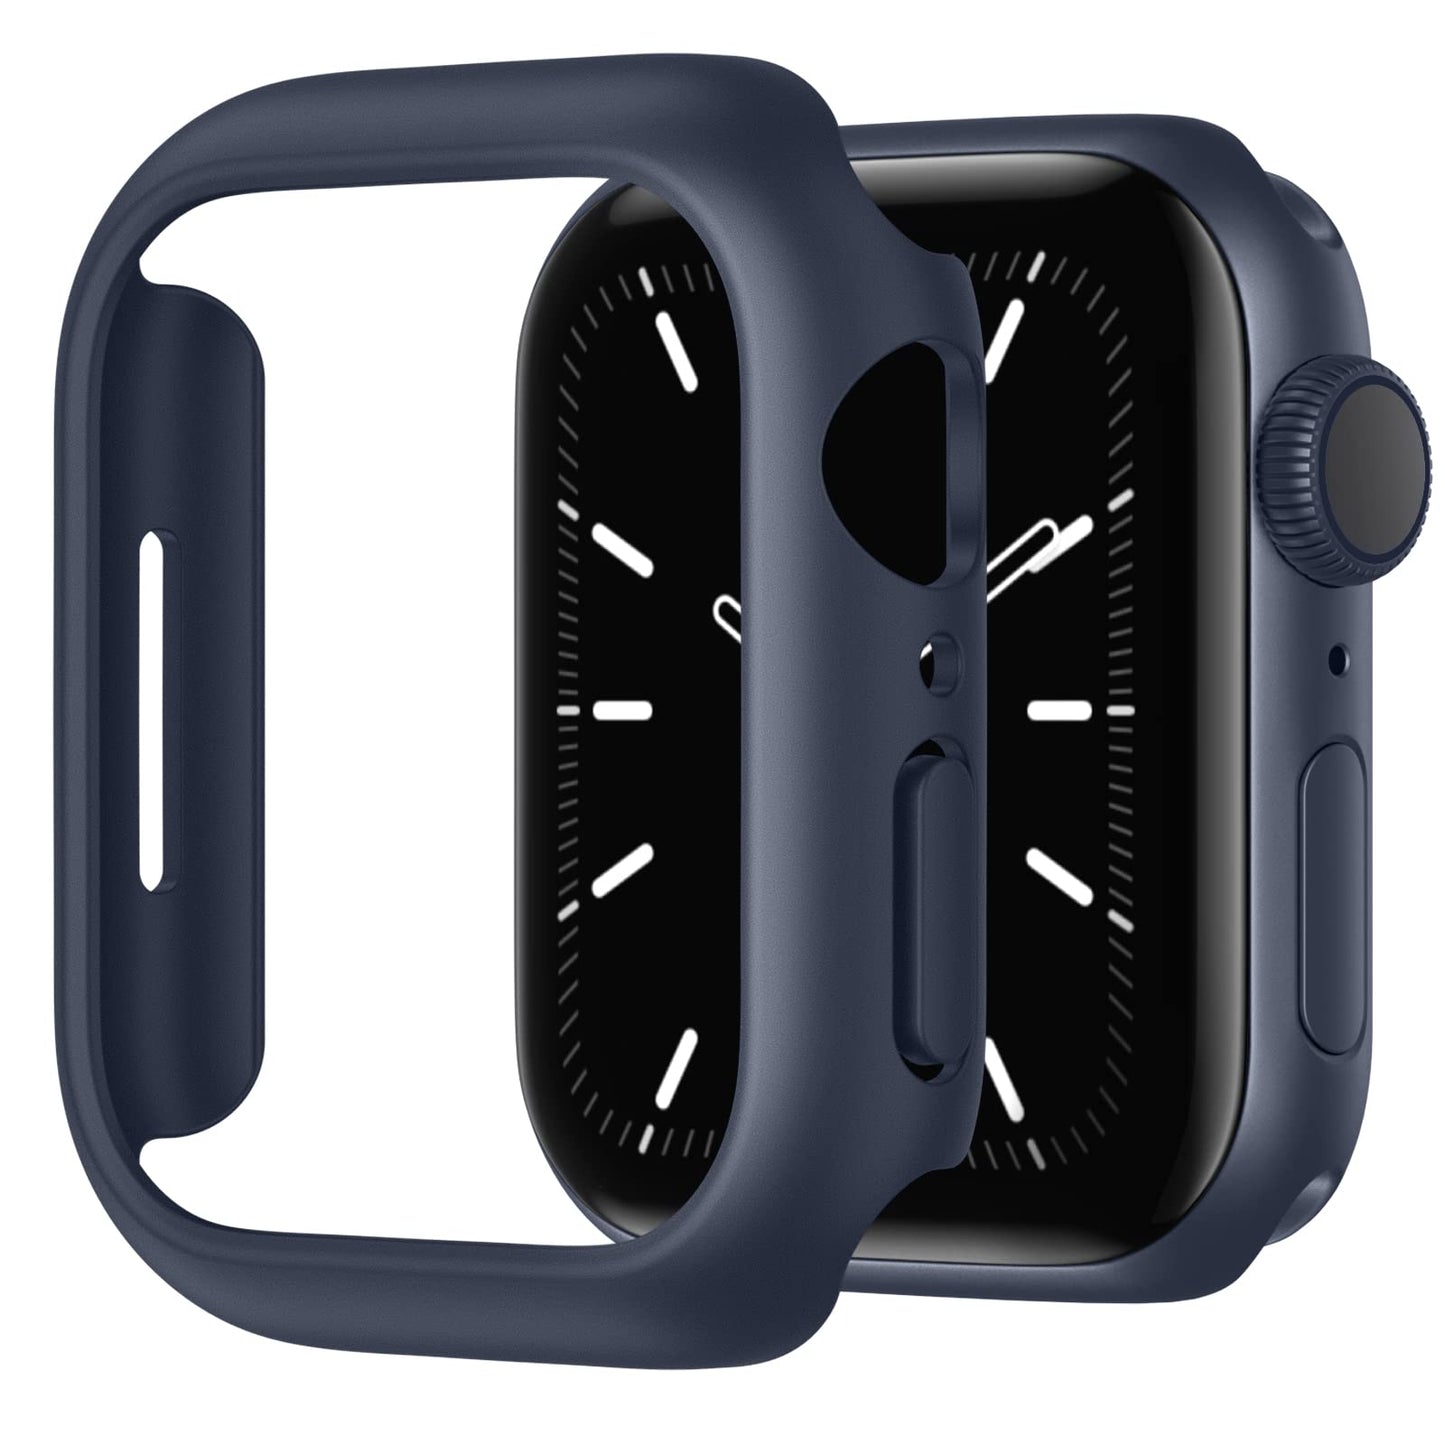 Apple Watch Case Protector